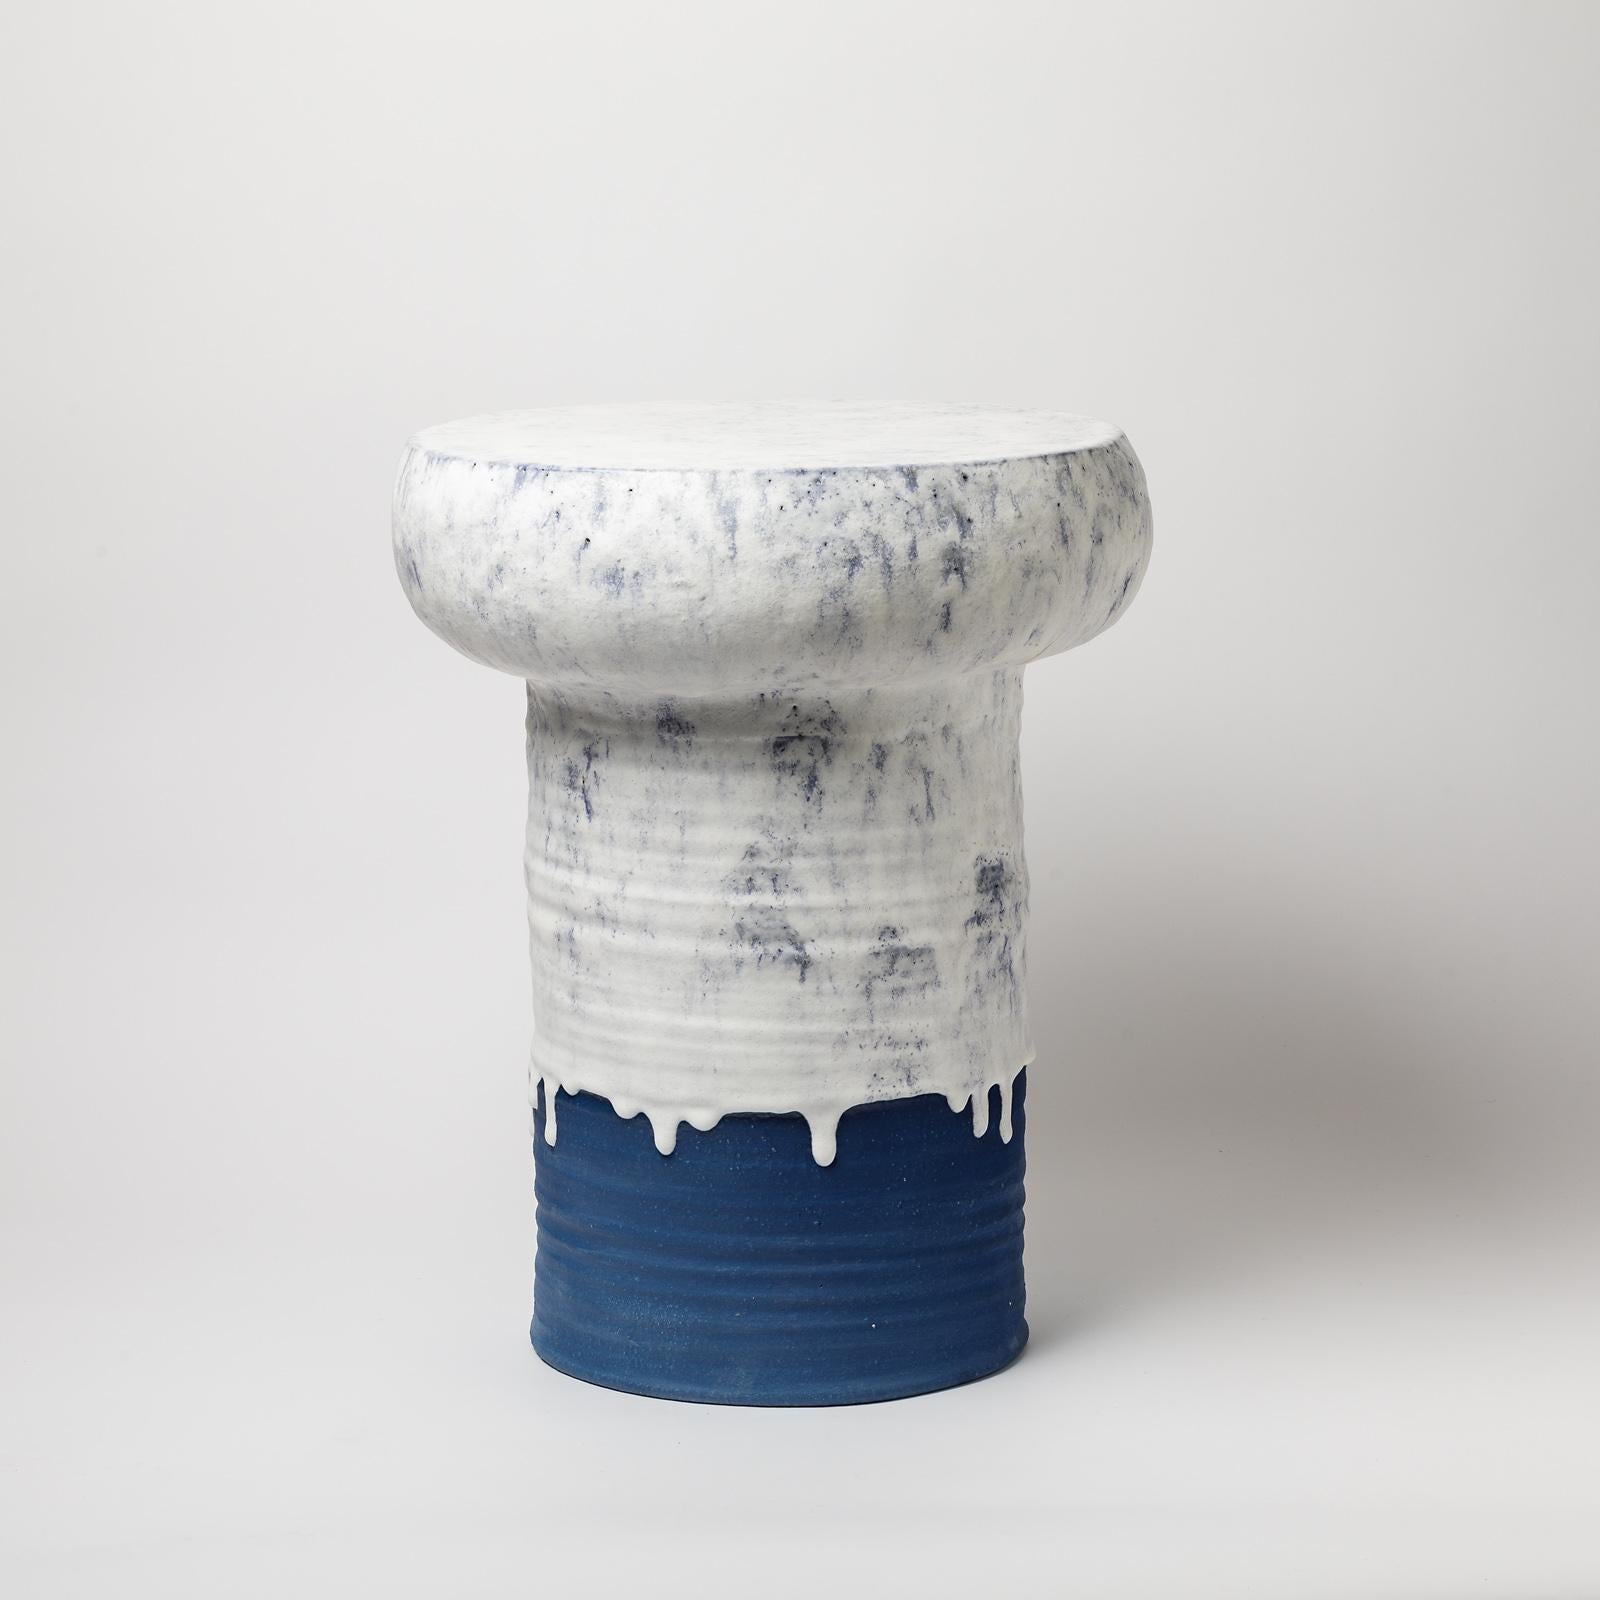 A ceramic stool with blue and white glazes decoration by Mia Jensen.
Unique piece.
Signed under the base.
Circa 2021.